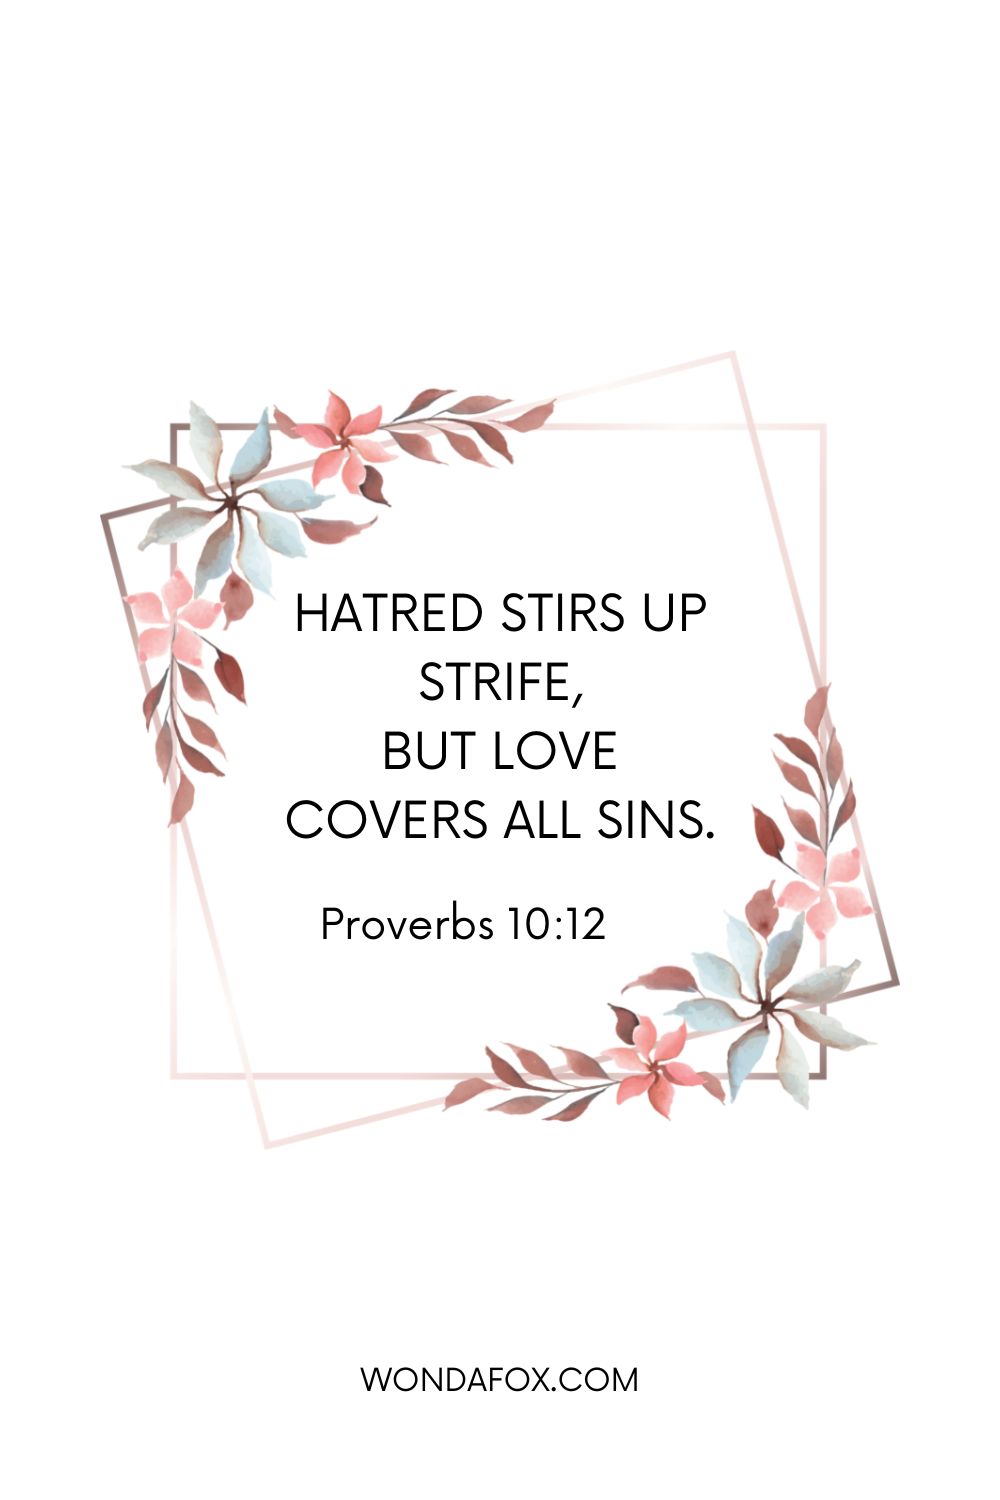 Hatred stirs up strife, But love covers all sins.